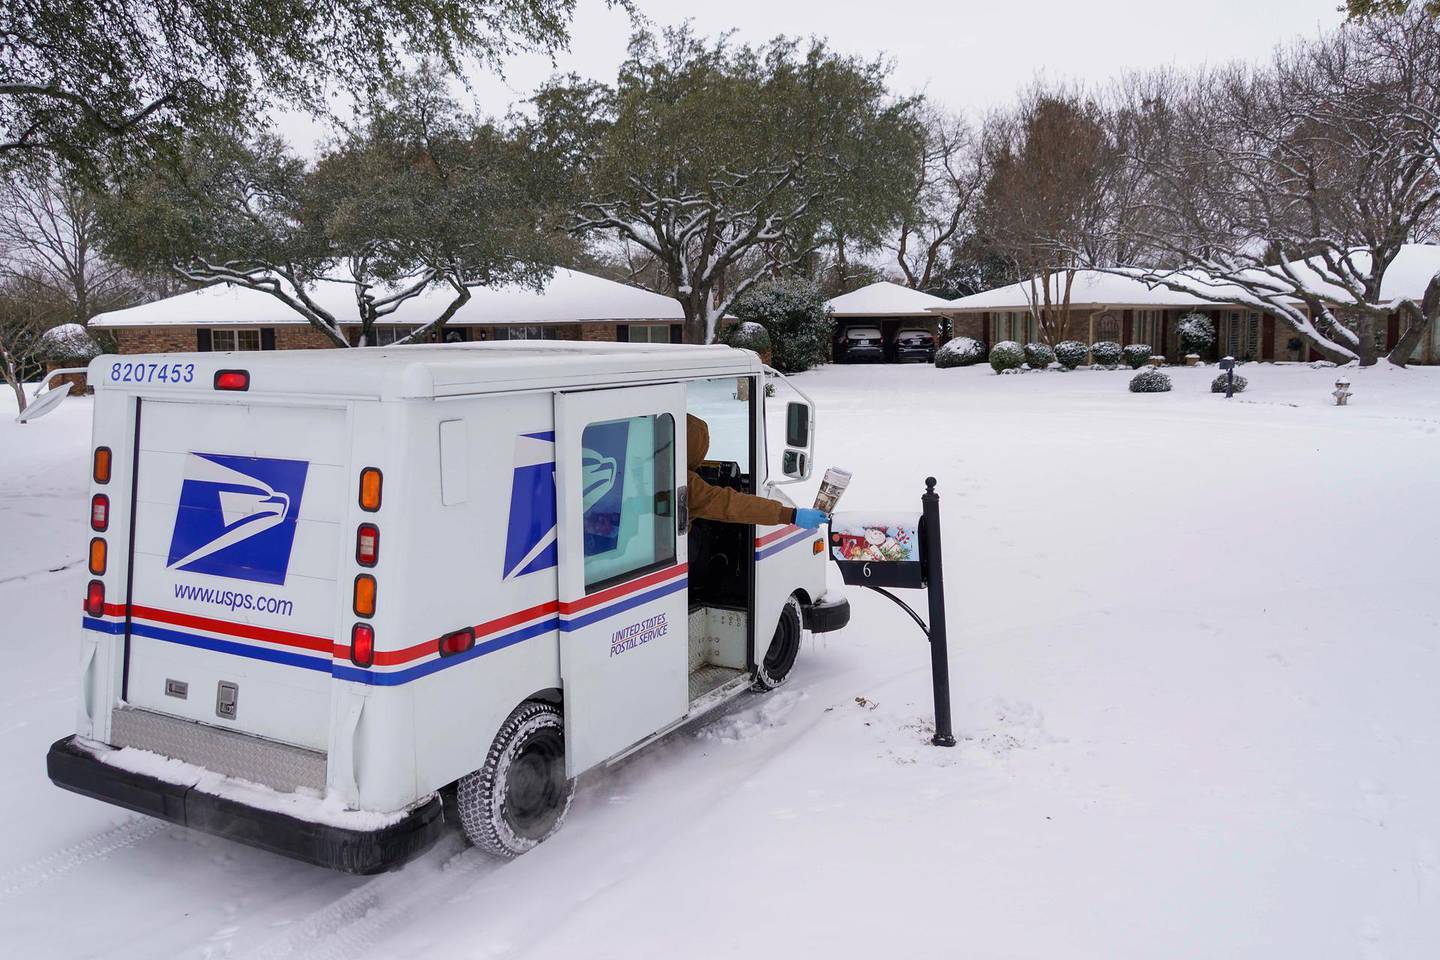 Letter carrier Angel Garcia delivers mail to a snow covered neighborhood after a second winter storm brought more snow and continued freezing temperatures to North Texas on Wednesday, Feb. 17, 2021, in Richardson, Texas. "We're going slow, but we are getting it delivered," Garcia said of USPS mail deliveries. (Smiley N. Pool/The Dallas Morning News via AP)